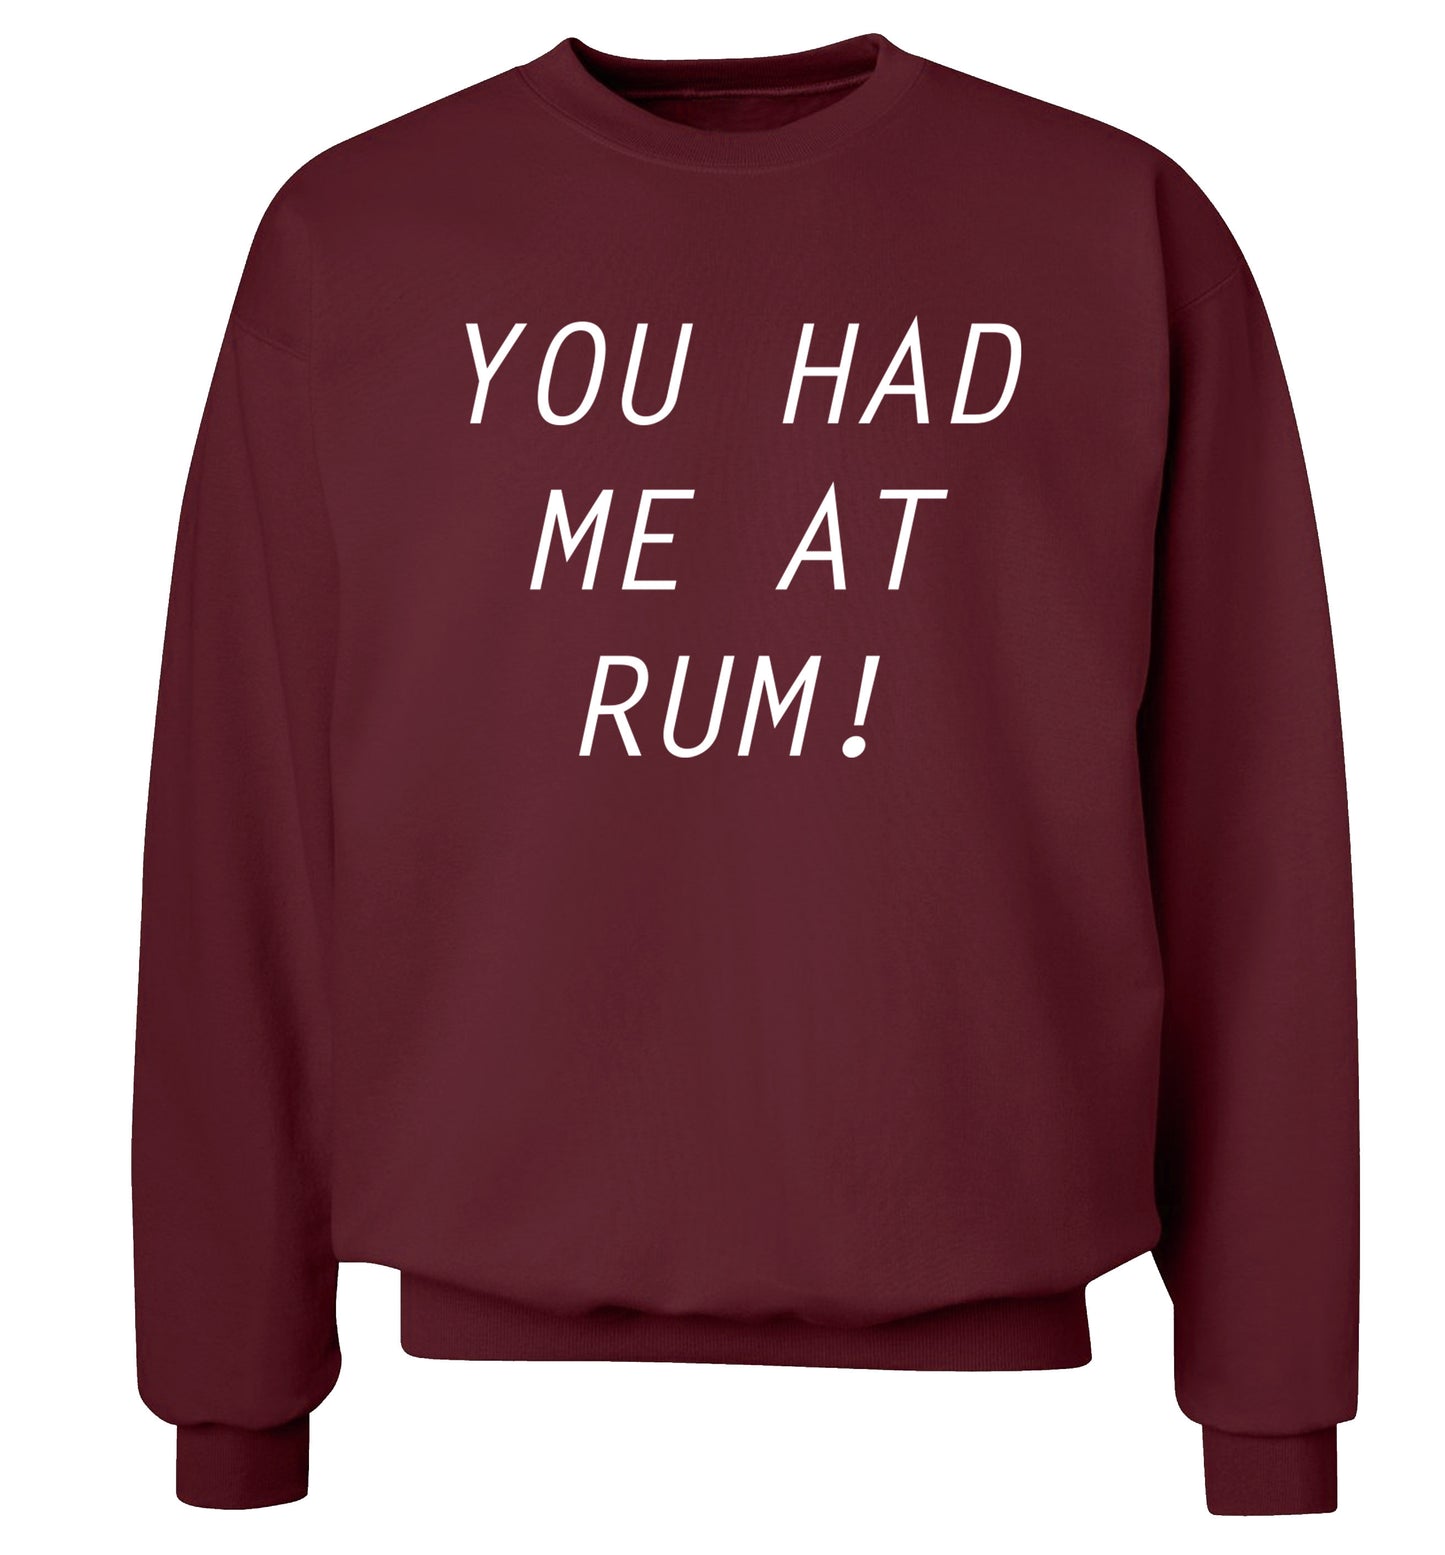 You had me at rum Adult's unisex maroon Sweater 2XL